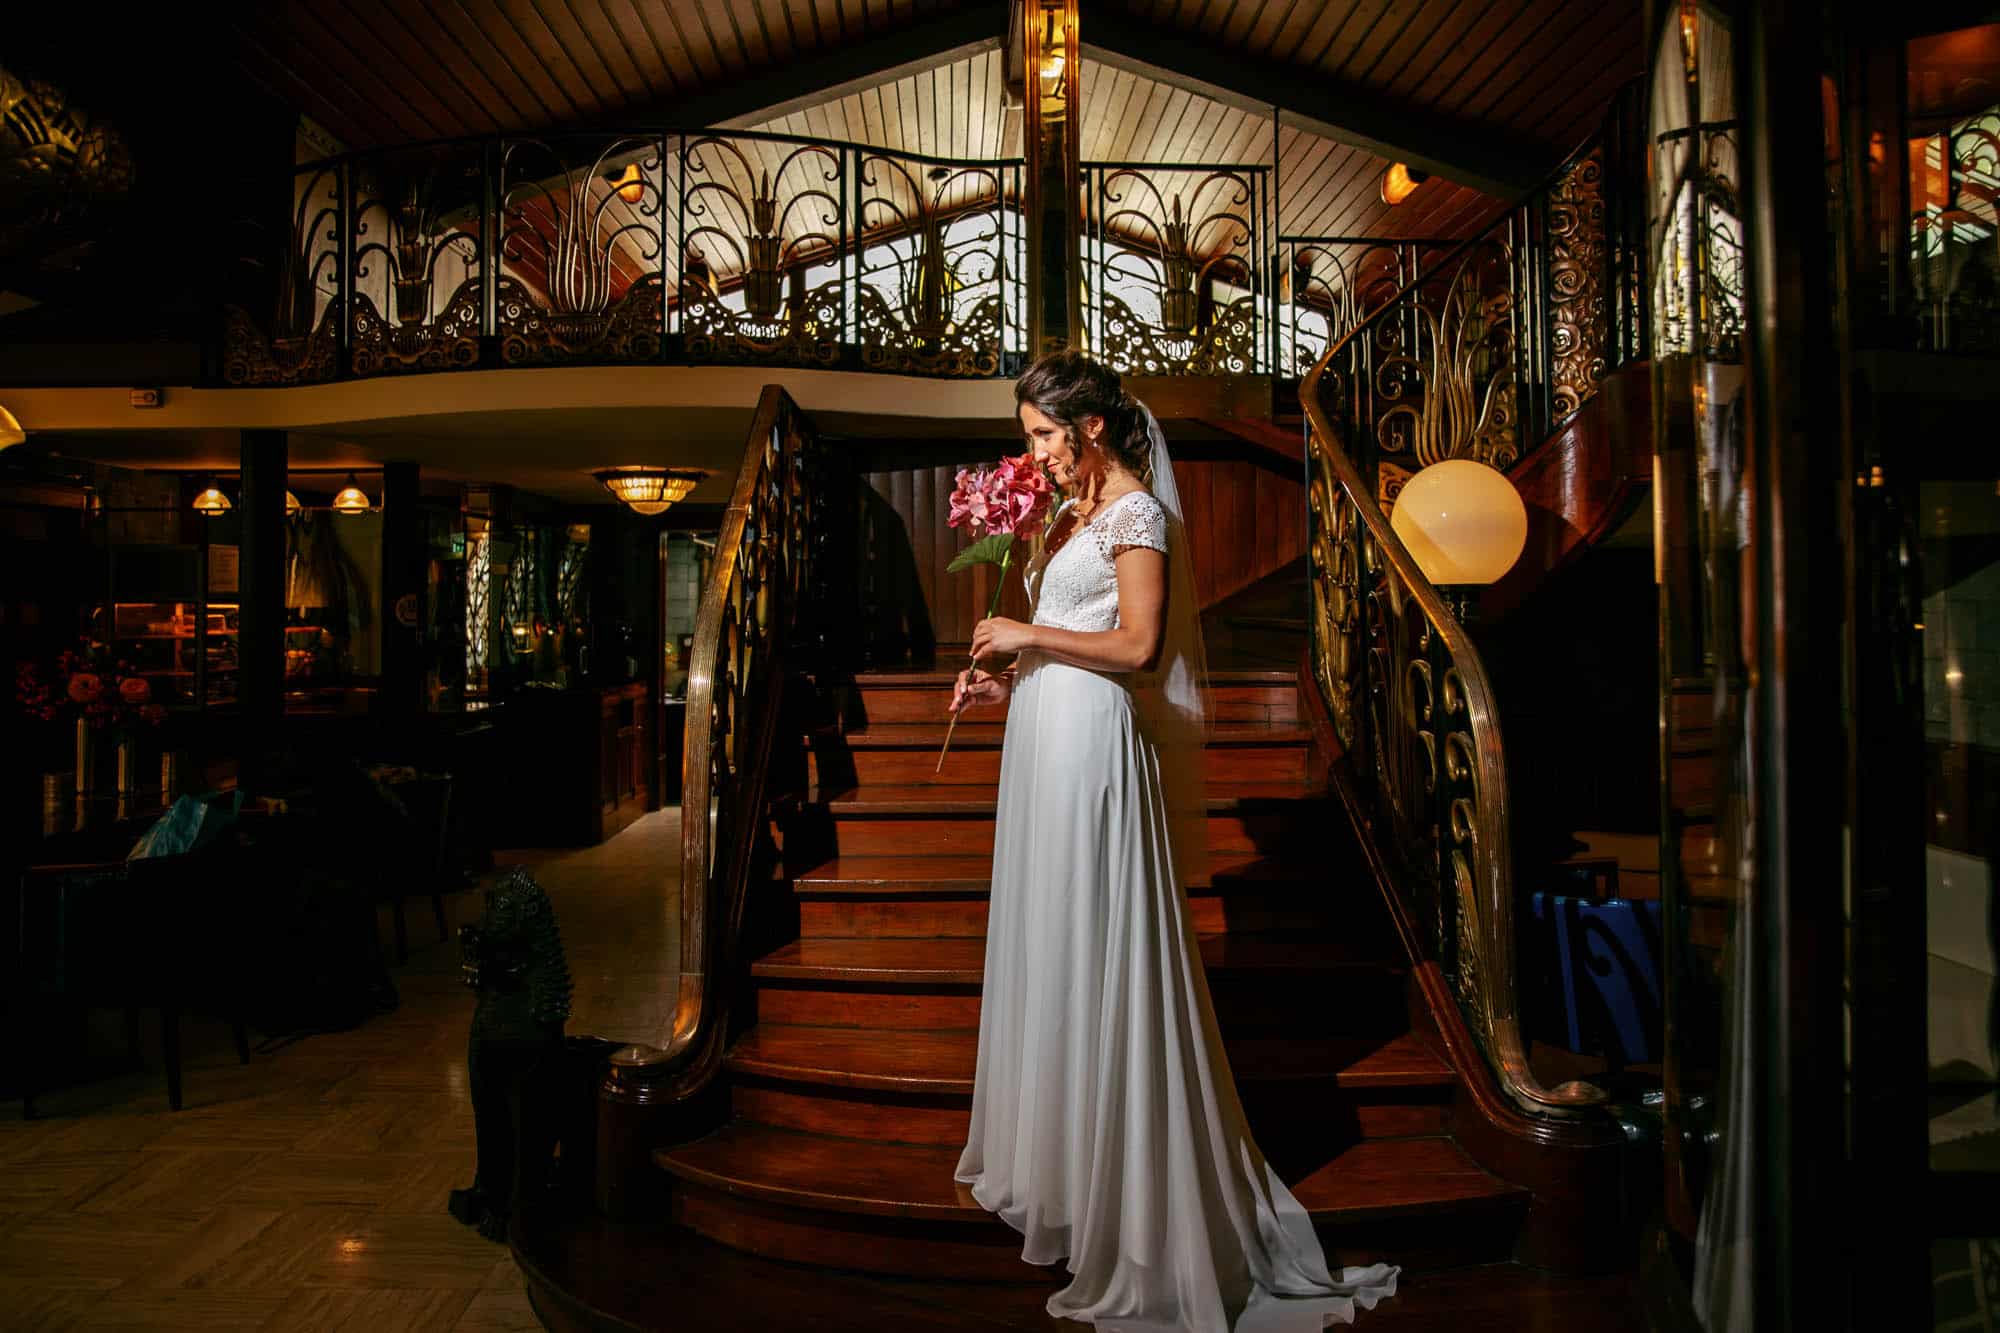 A Bohemian bride standing on the steps of a restaurant.